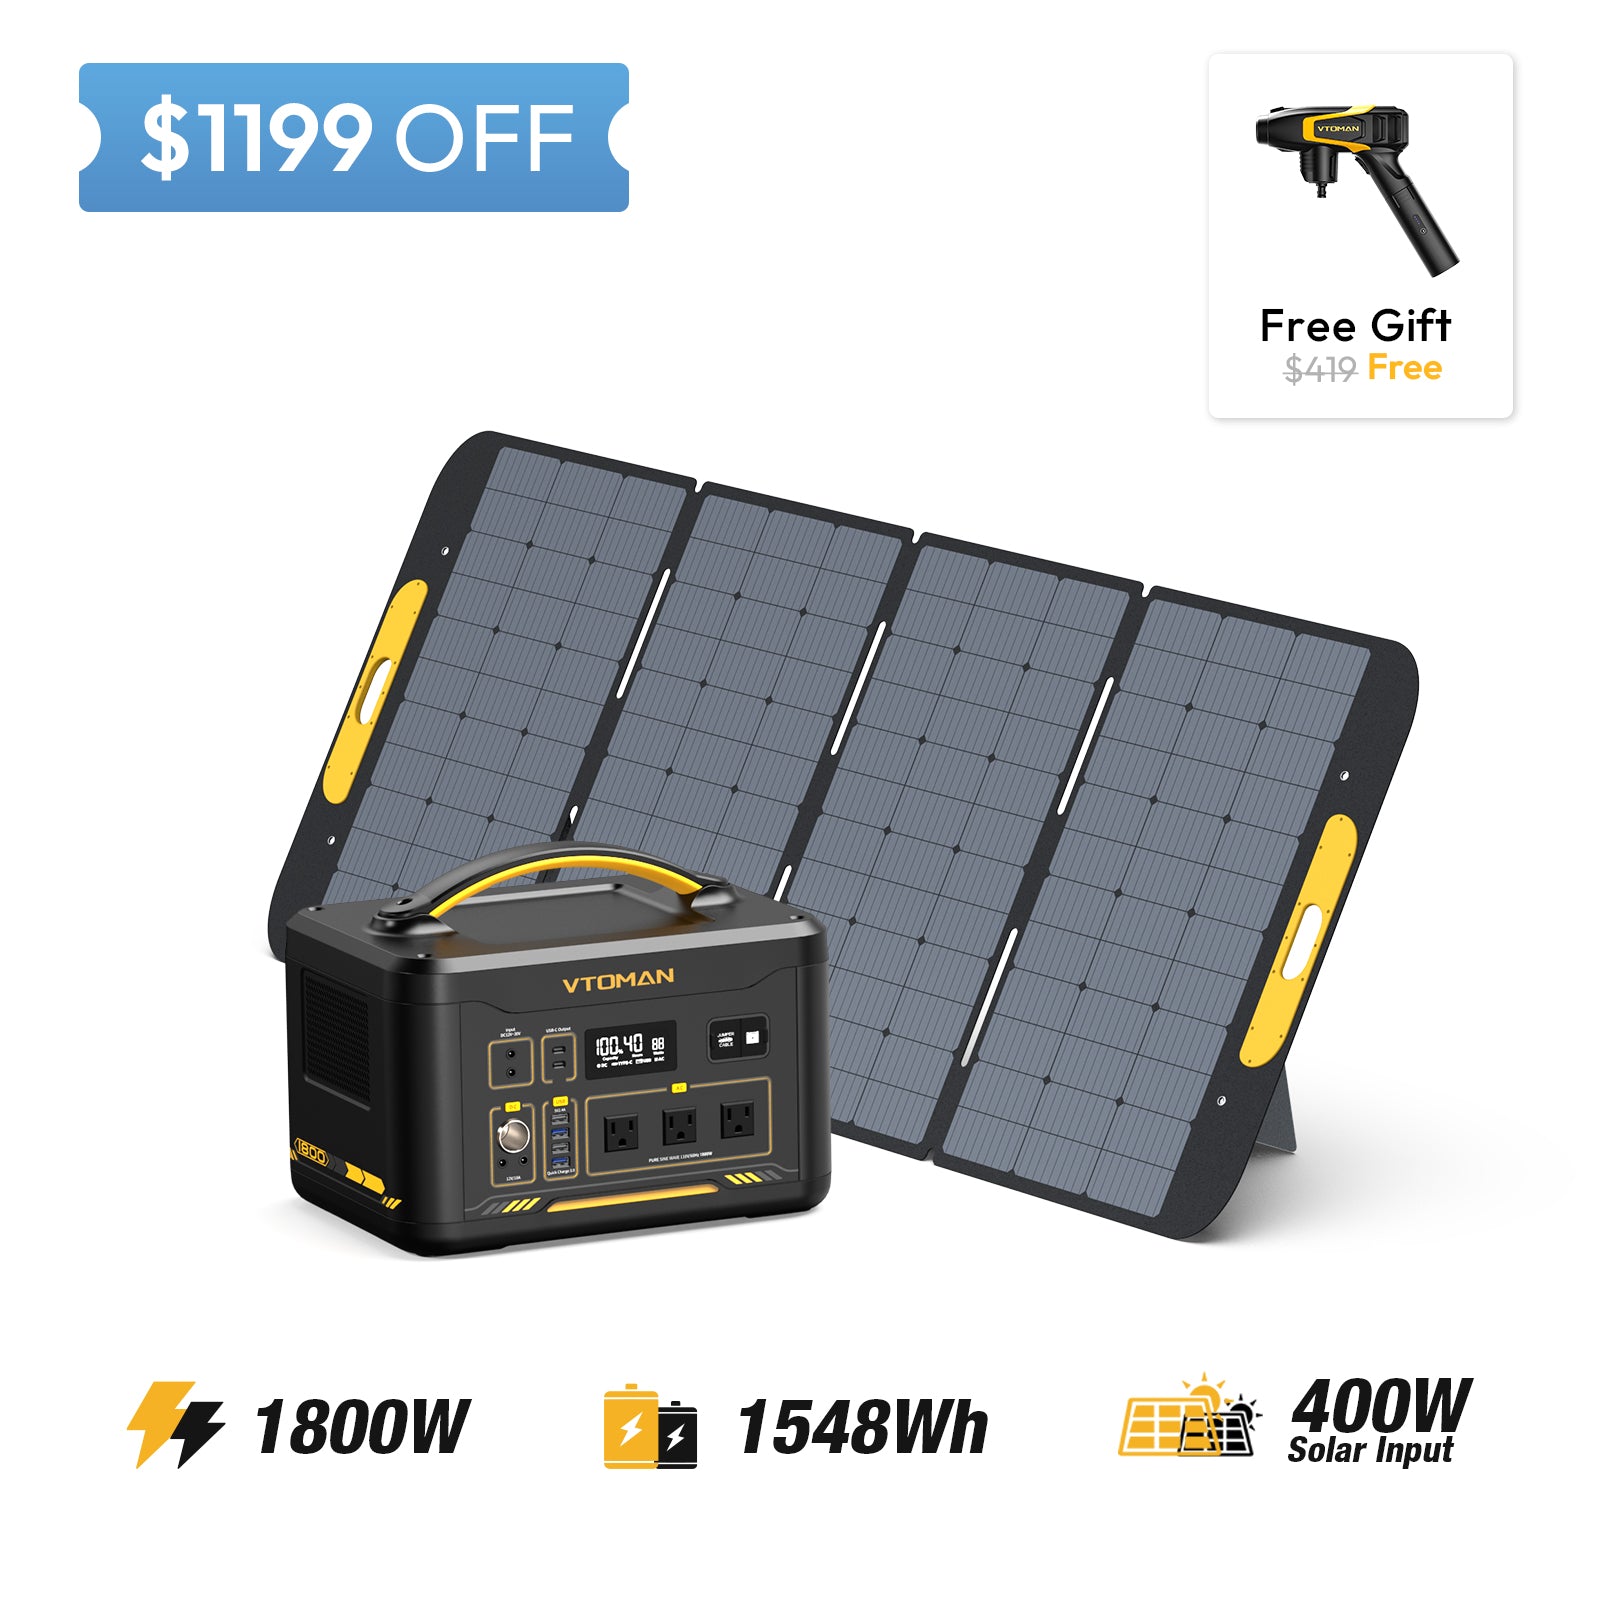 jump 1800 and 400w solar pane save $1199 in summer sale